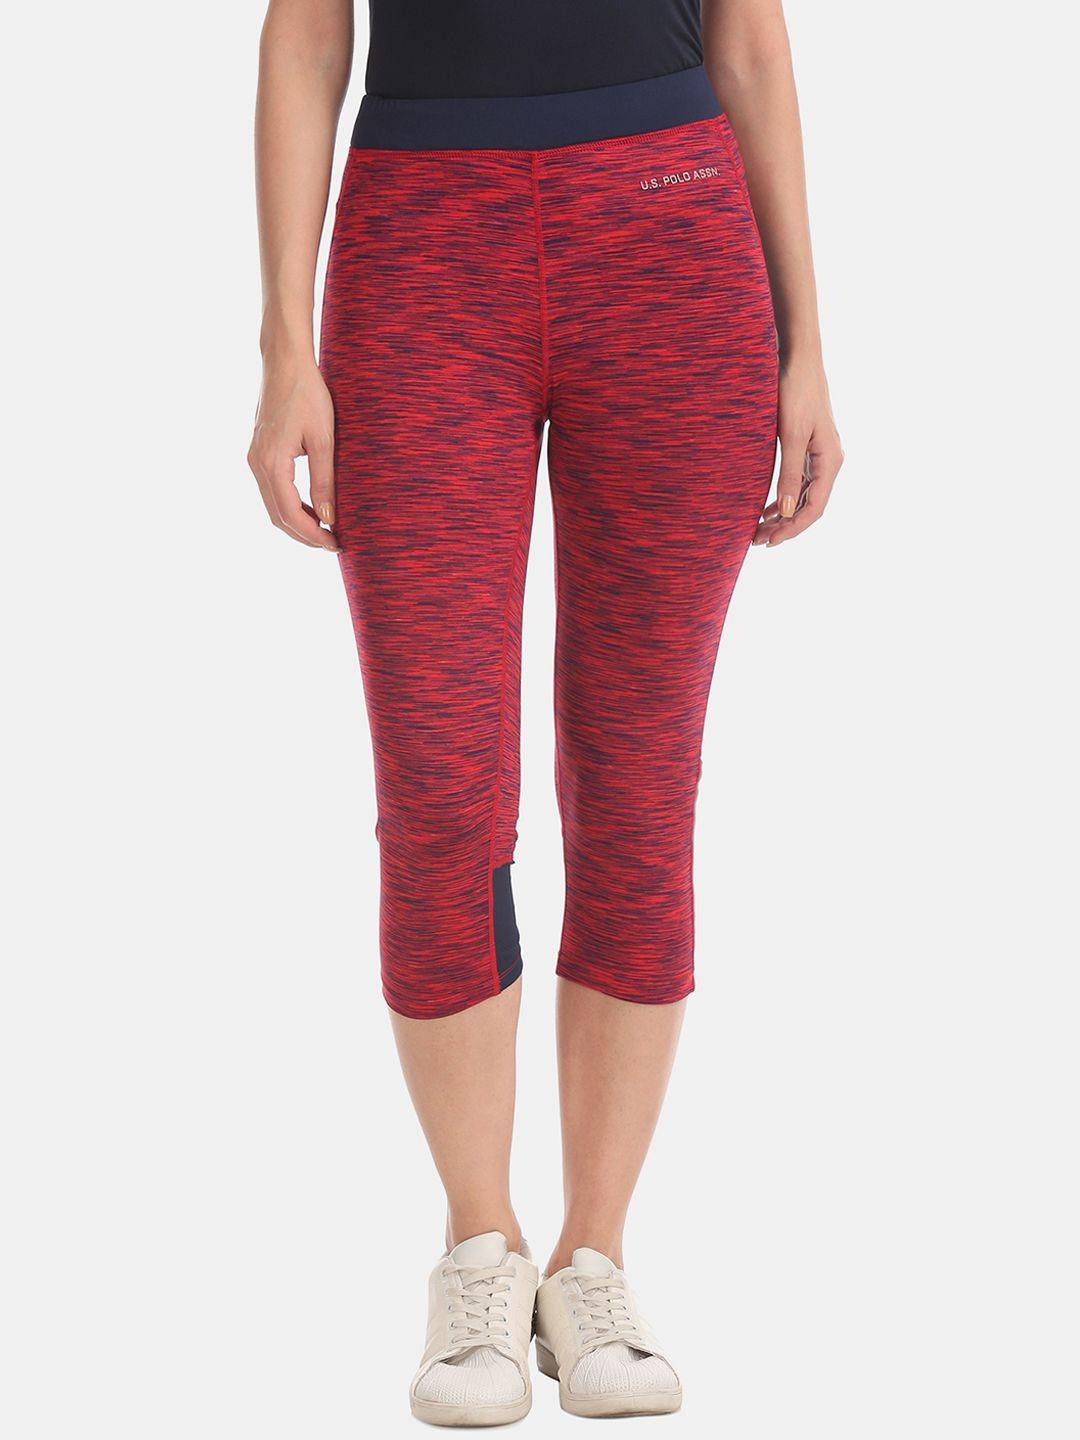 u.s. polo assn. women women red & black printed quick dry technology tights